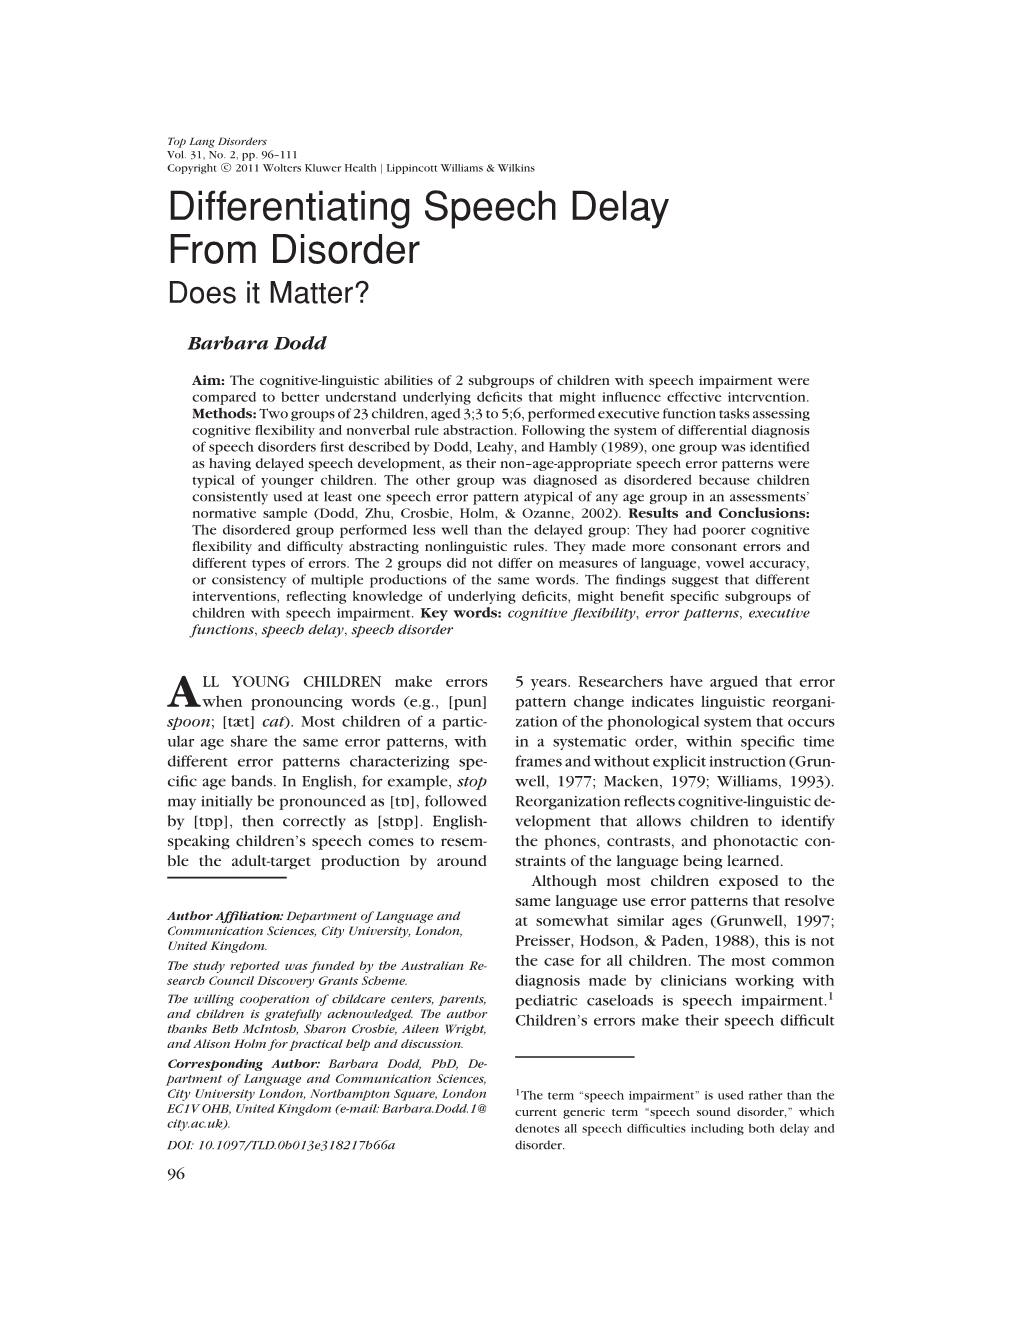 Differentiating Speech Delay from Disorder Does It Matter?